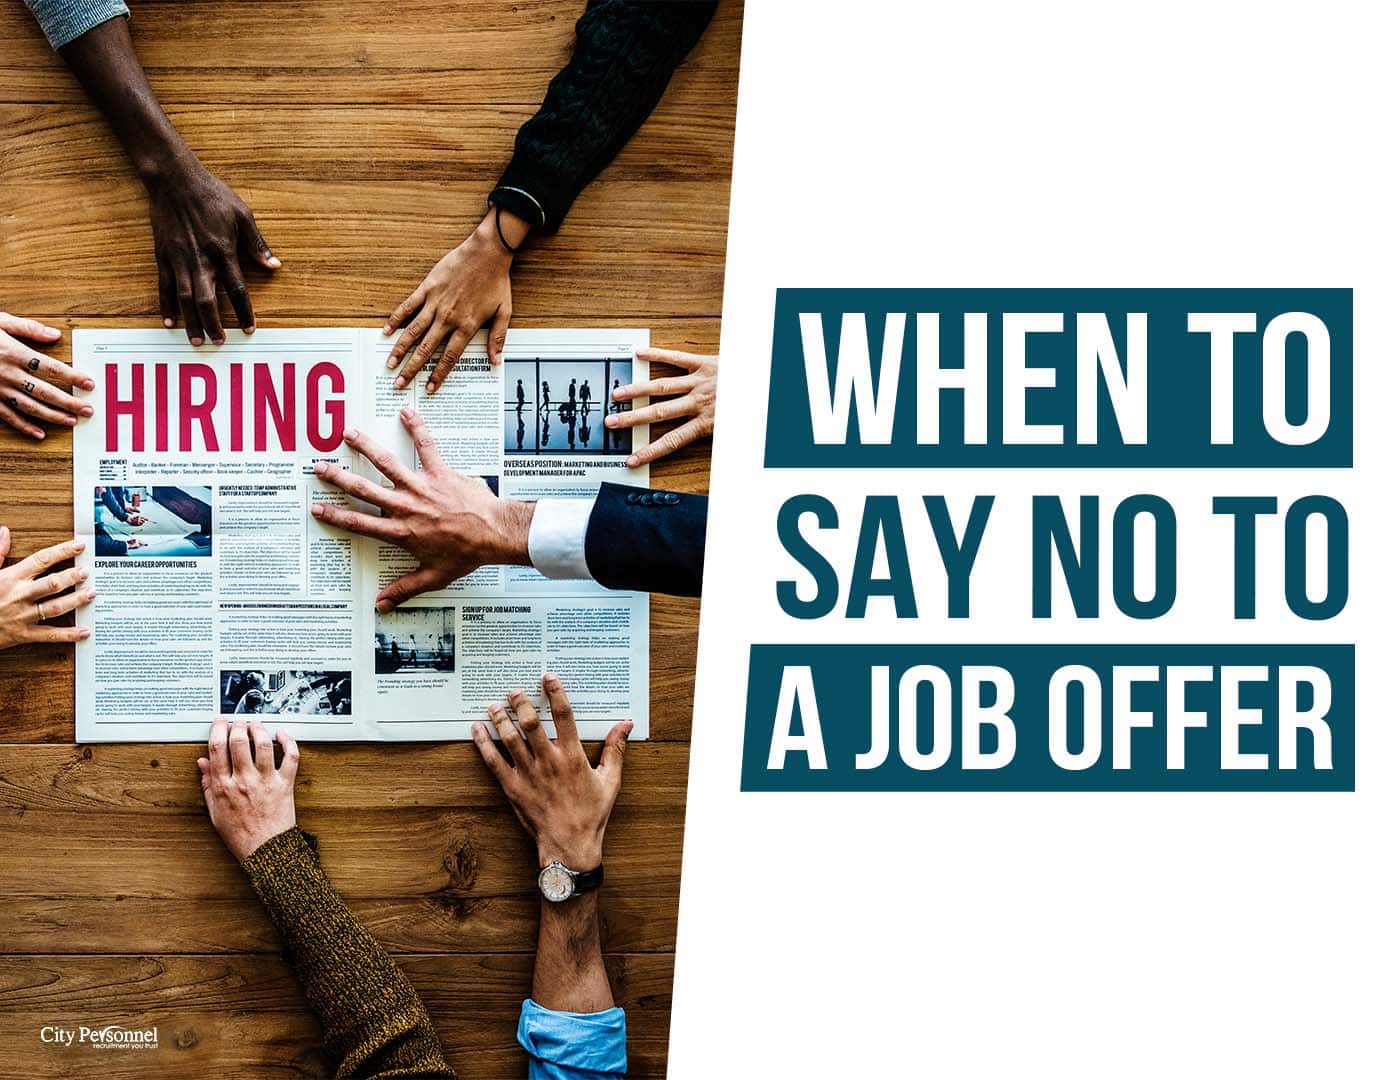 When to say no to a job offer